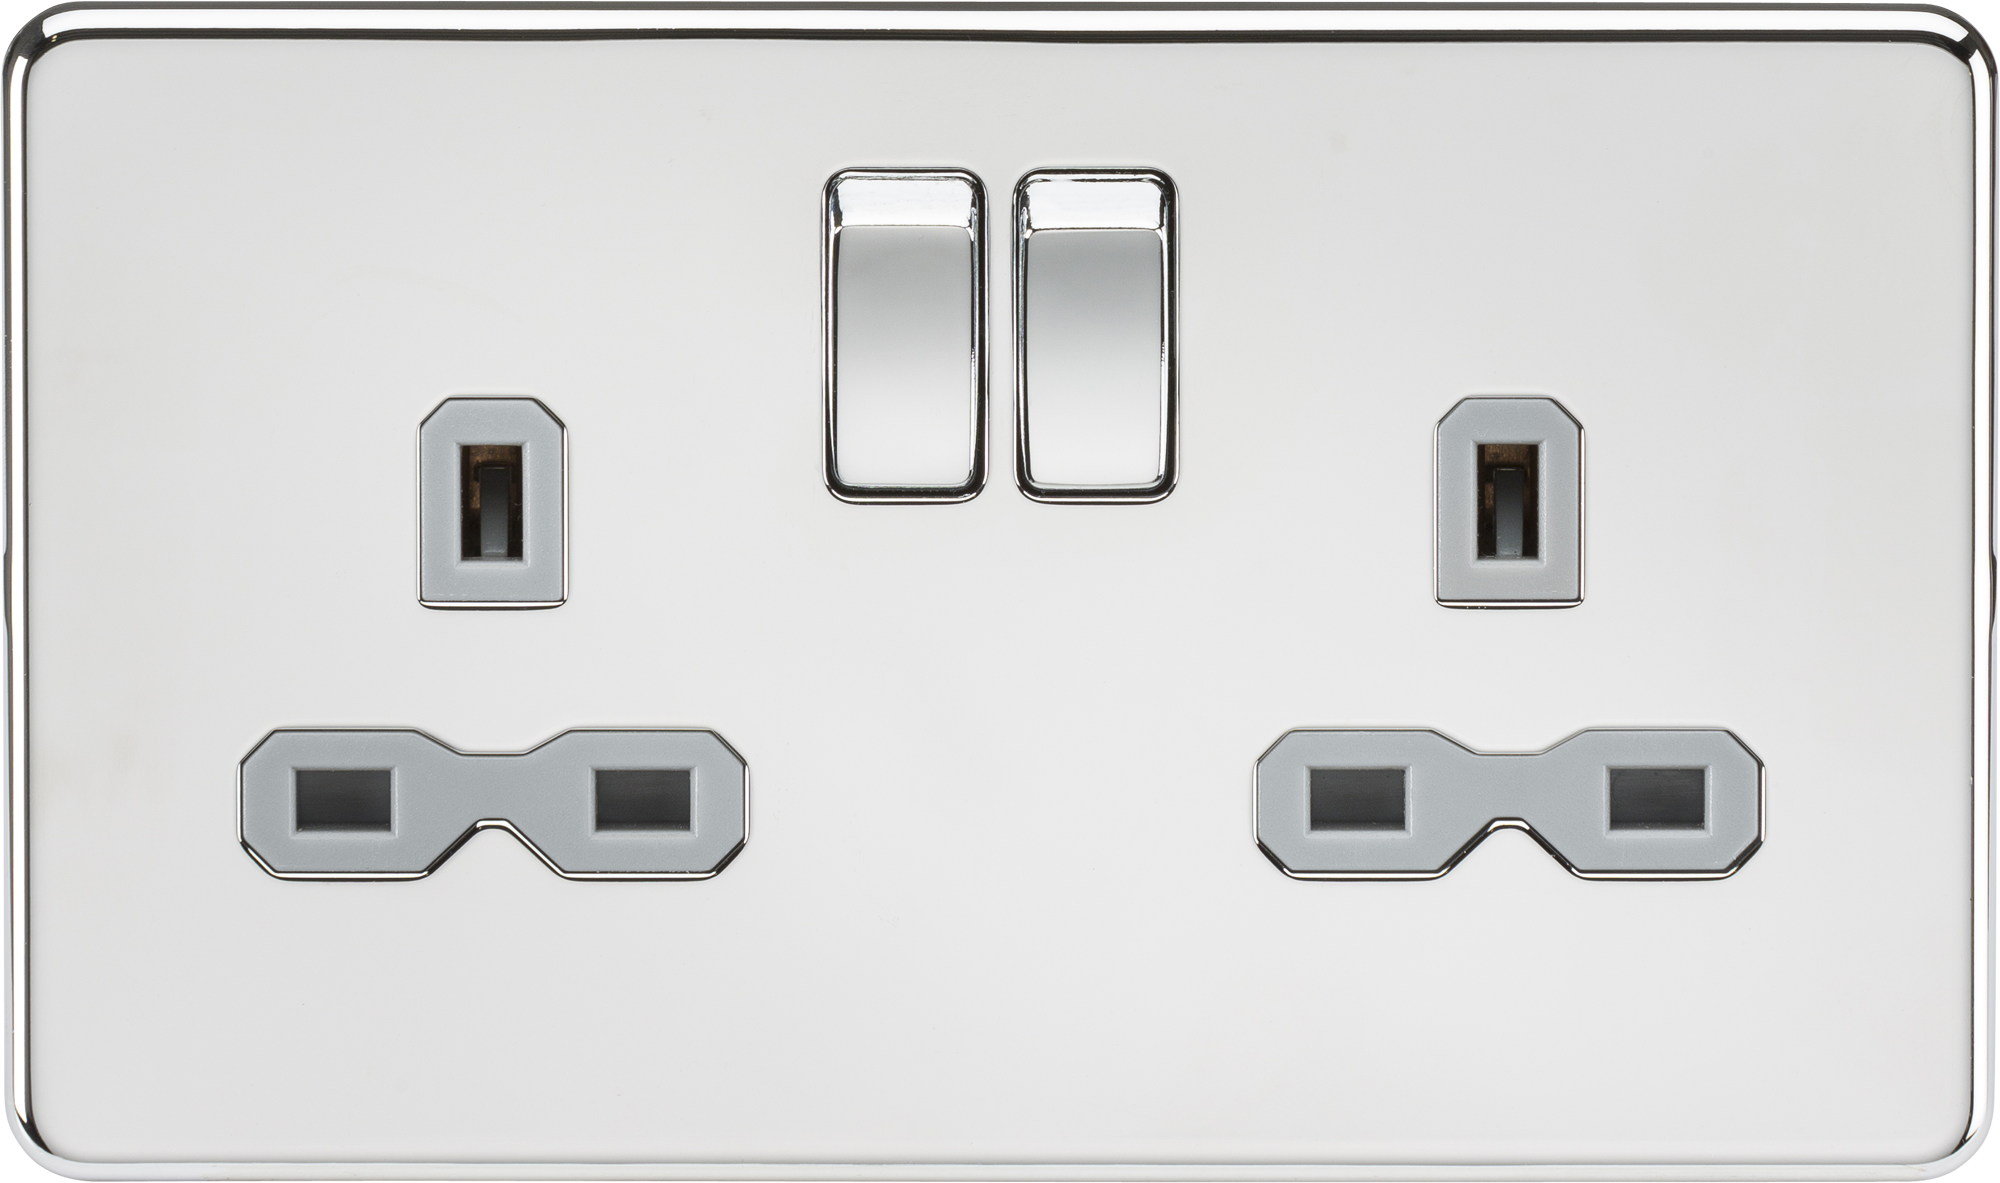 Screwless 13A 2G DP Switched Socket - Polished Chrome With Grey Insert - SFR9000PCG 